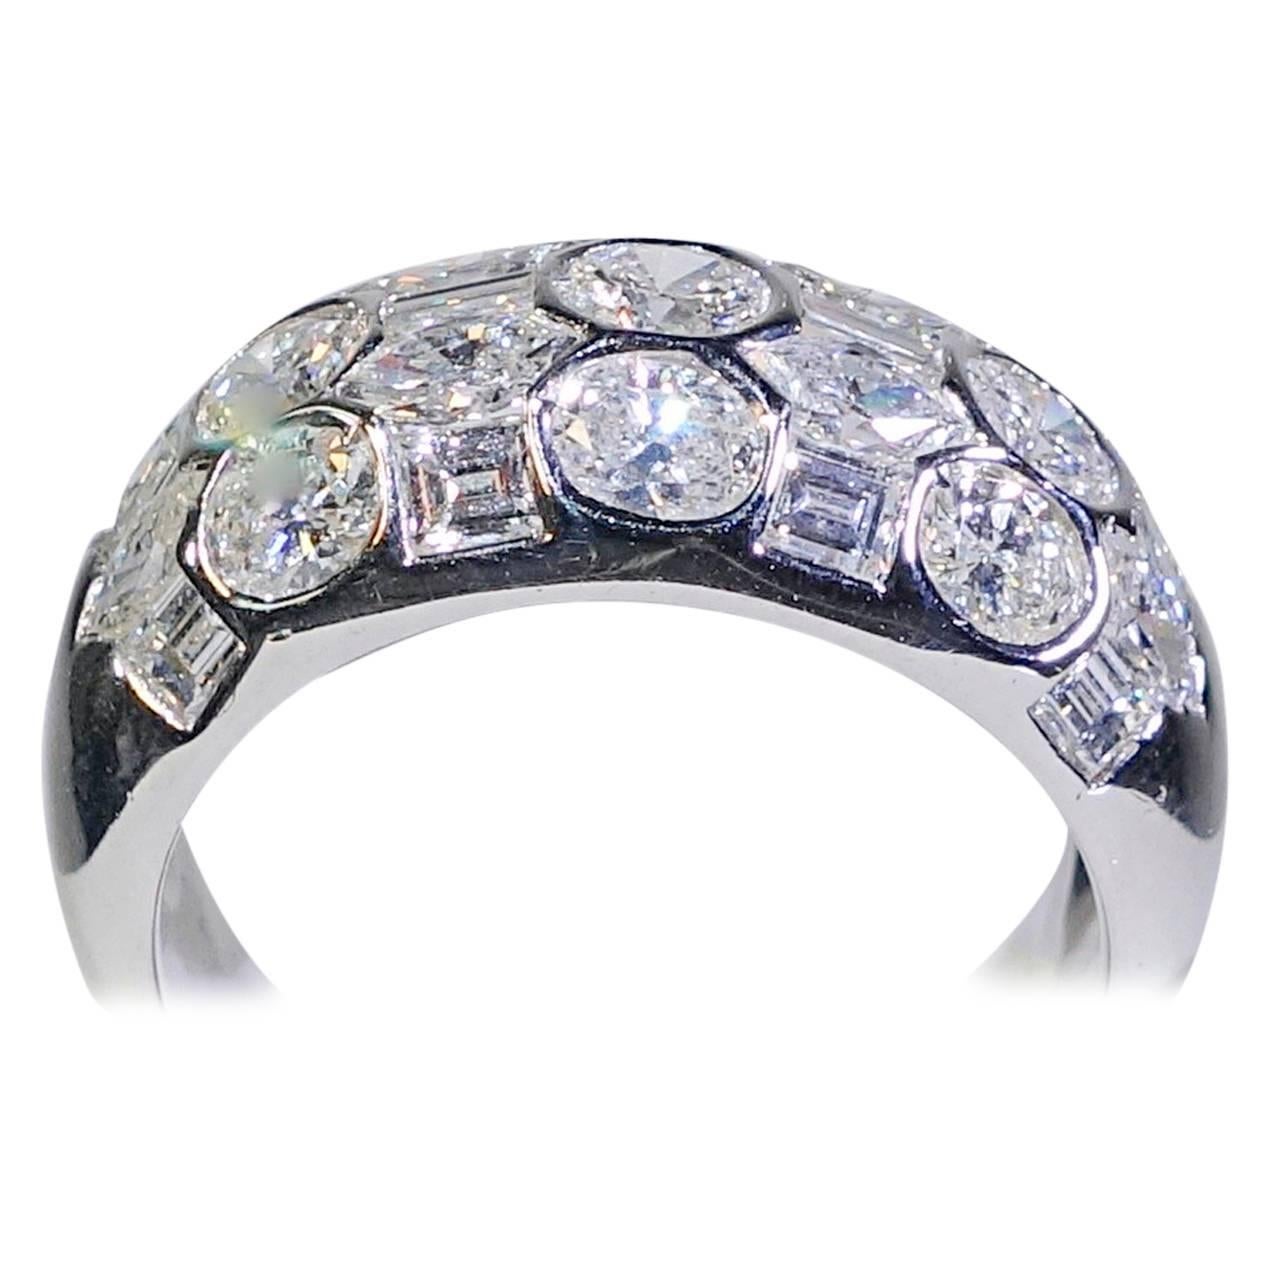 2.50 cts of fine white fancy cut diamonds are set into this 18K white gold band ring, signed and numbered by Beaudry. This ring is a size 5.5 and is sizable.